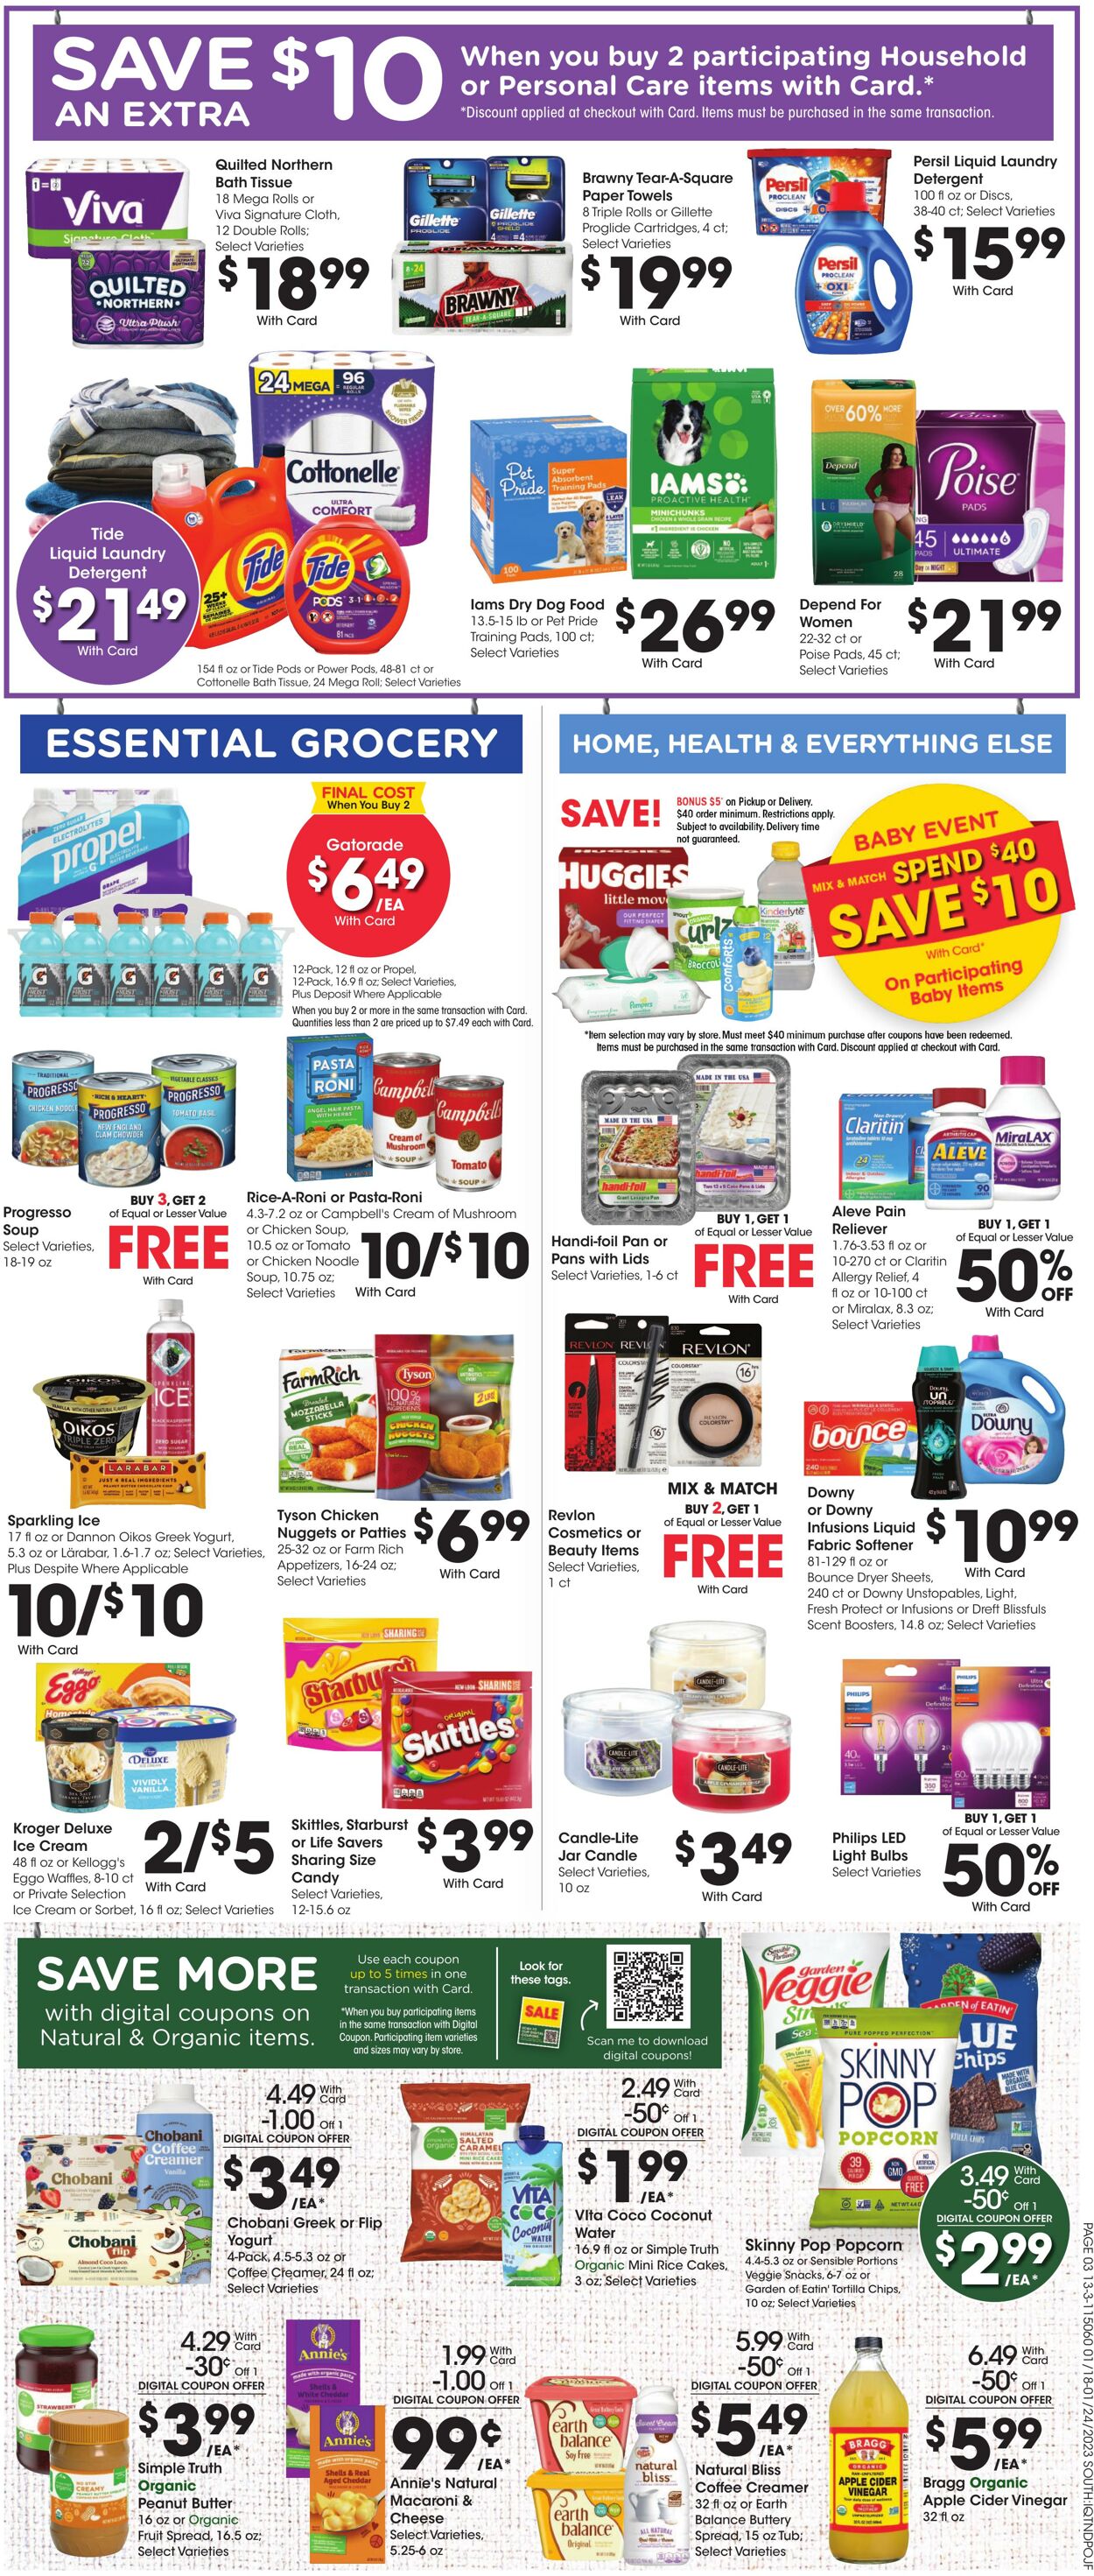 Weekly ad Fred Meyer 01/18/2023 - 01/24/2023